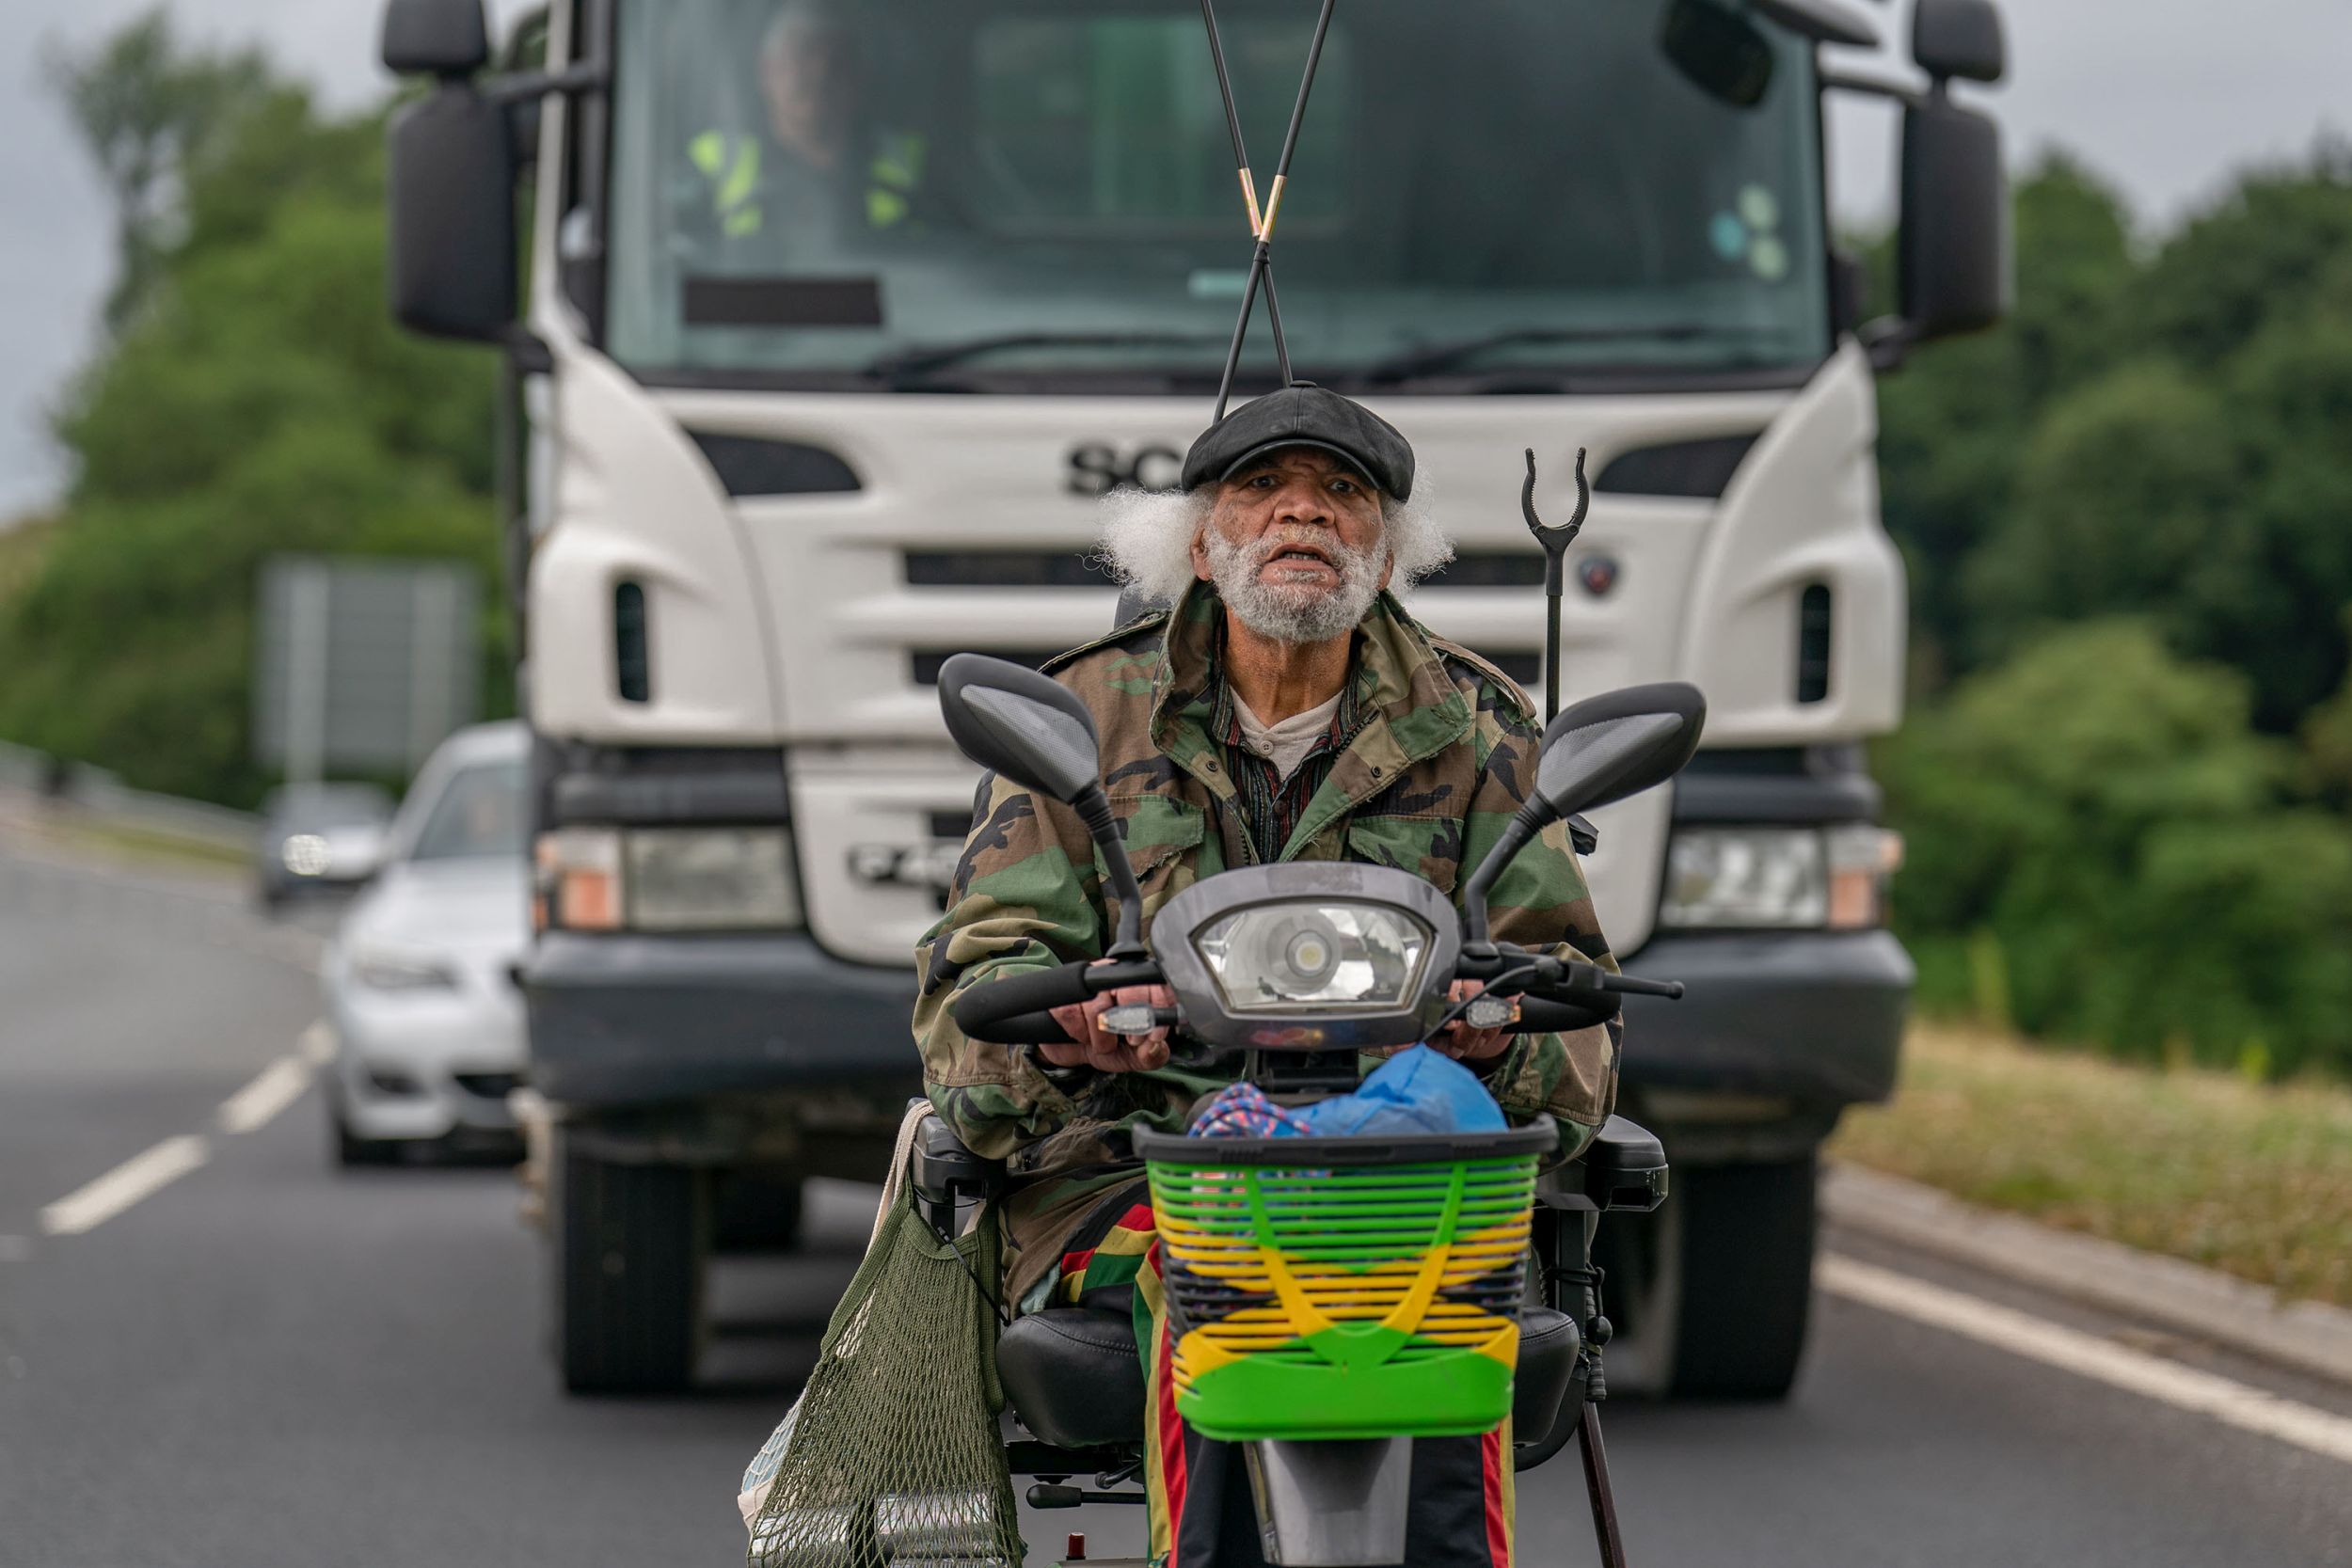 Paul Barber as Horse on a scooter in front of a lorry in The Full Monty